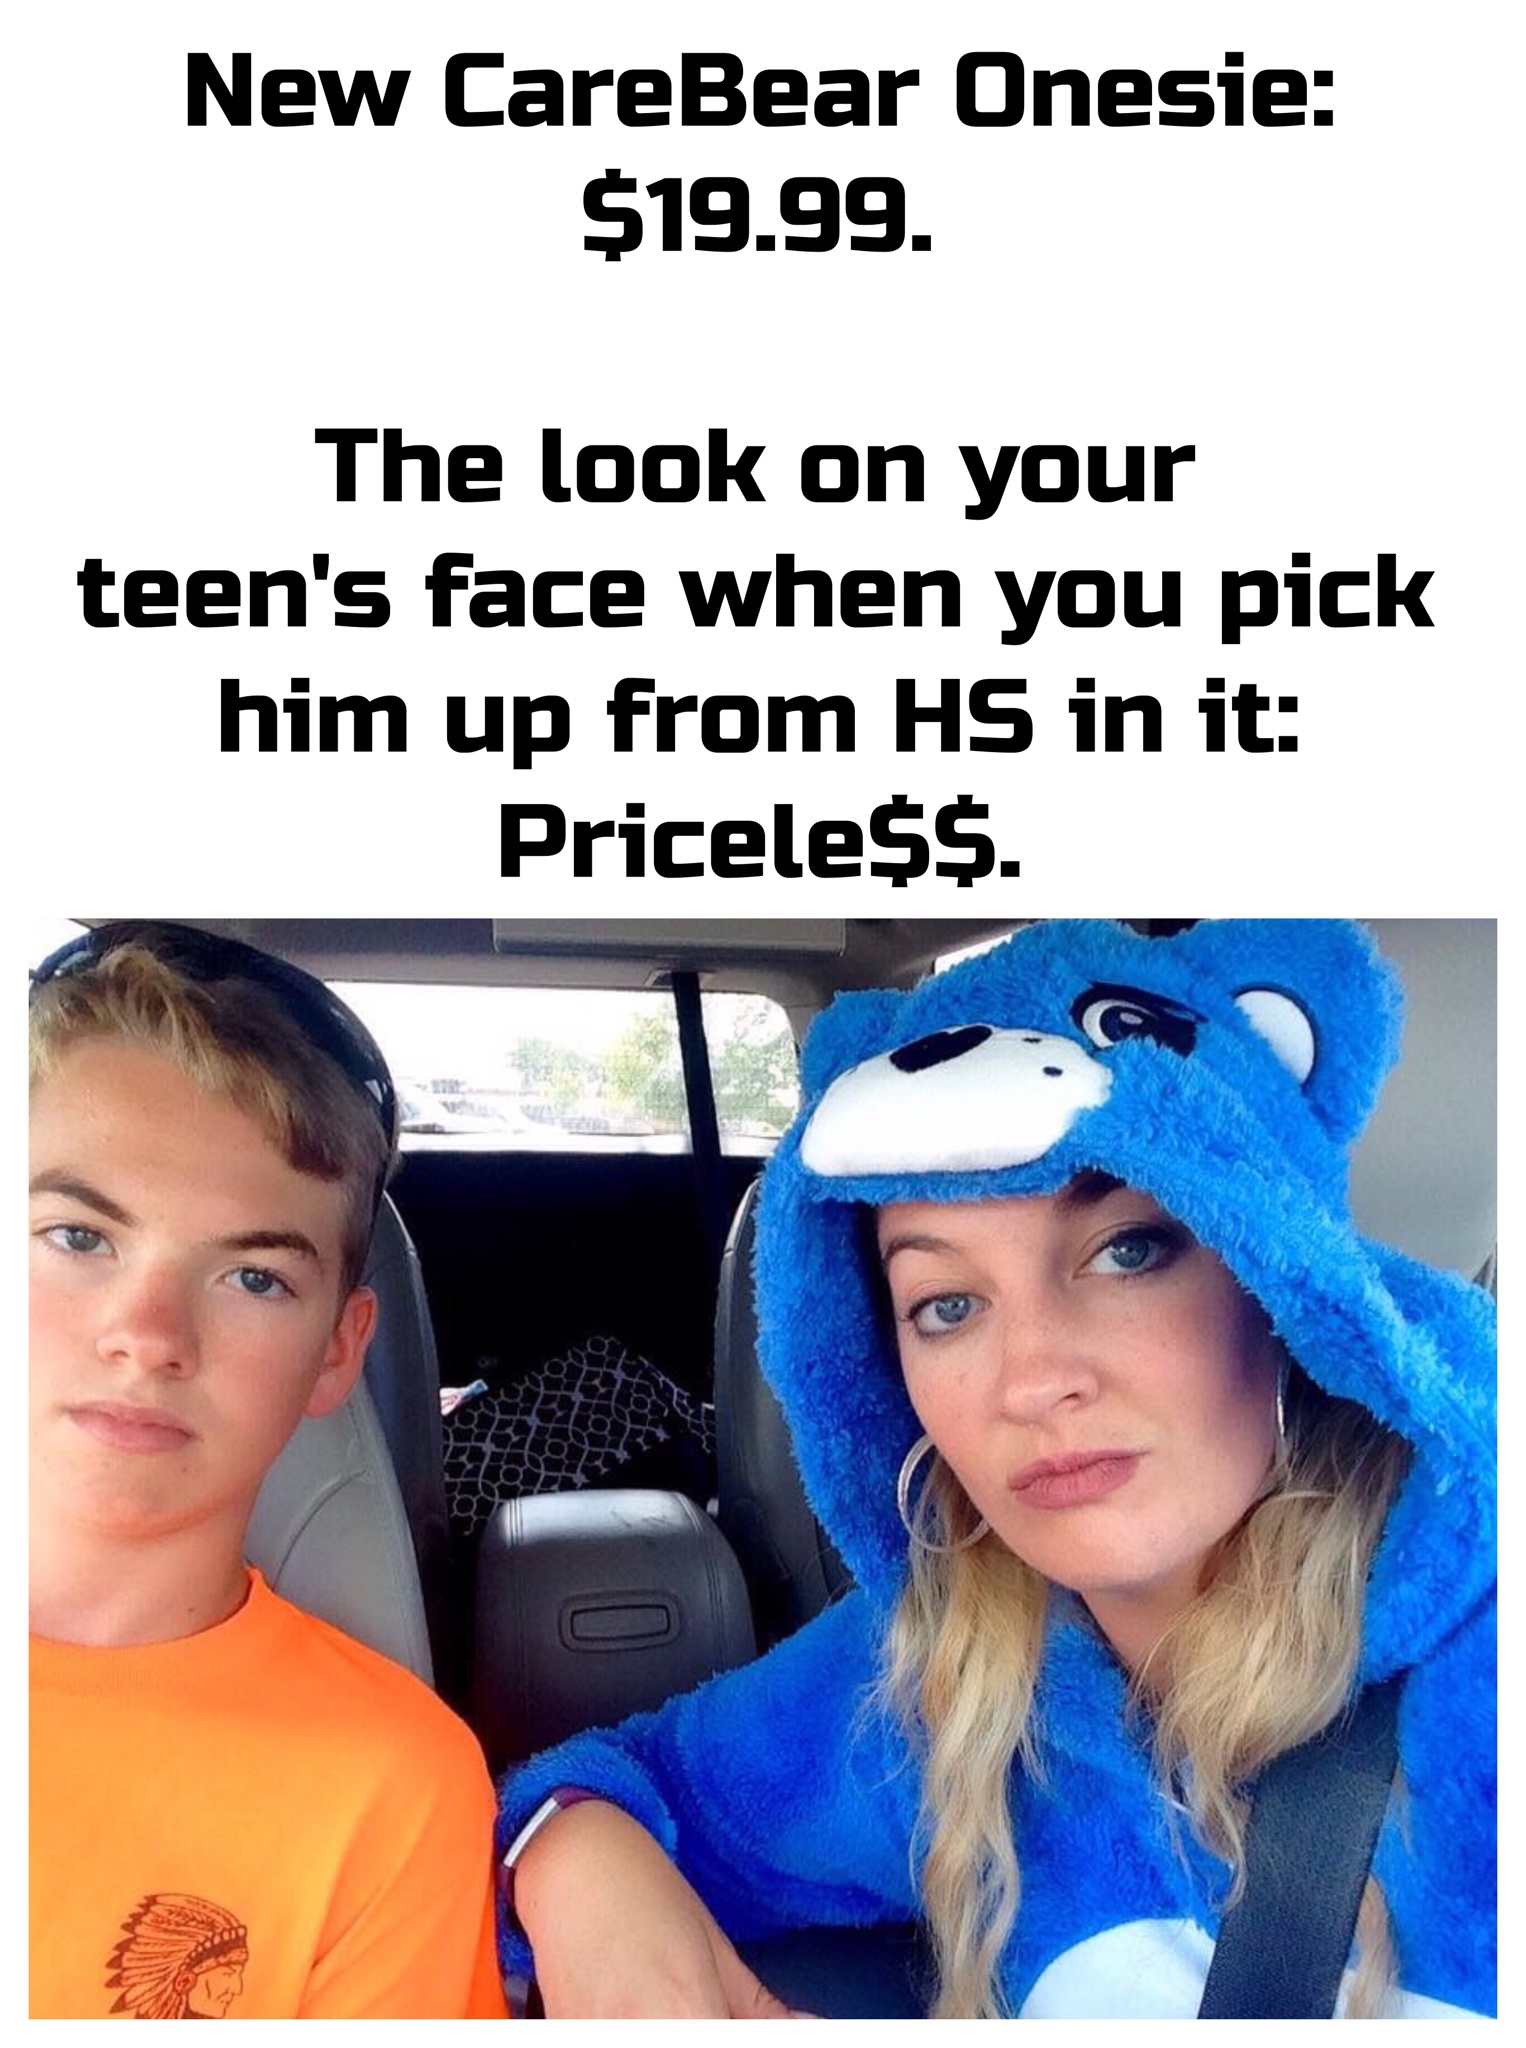 cap - New CareBear Onesie $19.99. The look on your teen's face when you pick him up from Hs in it Pricele$$.